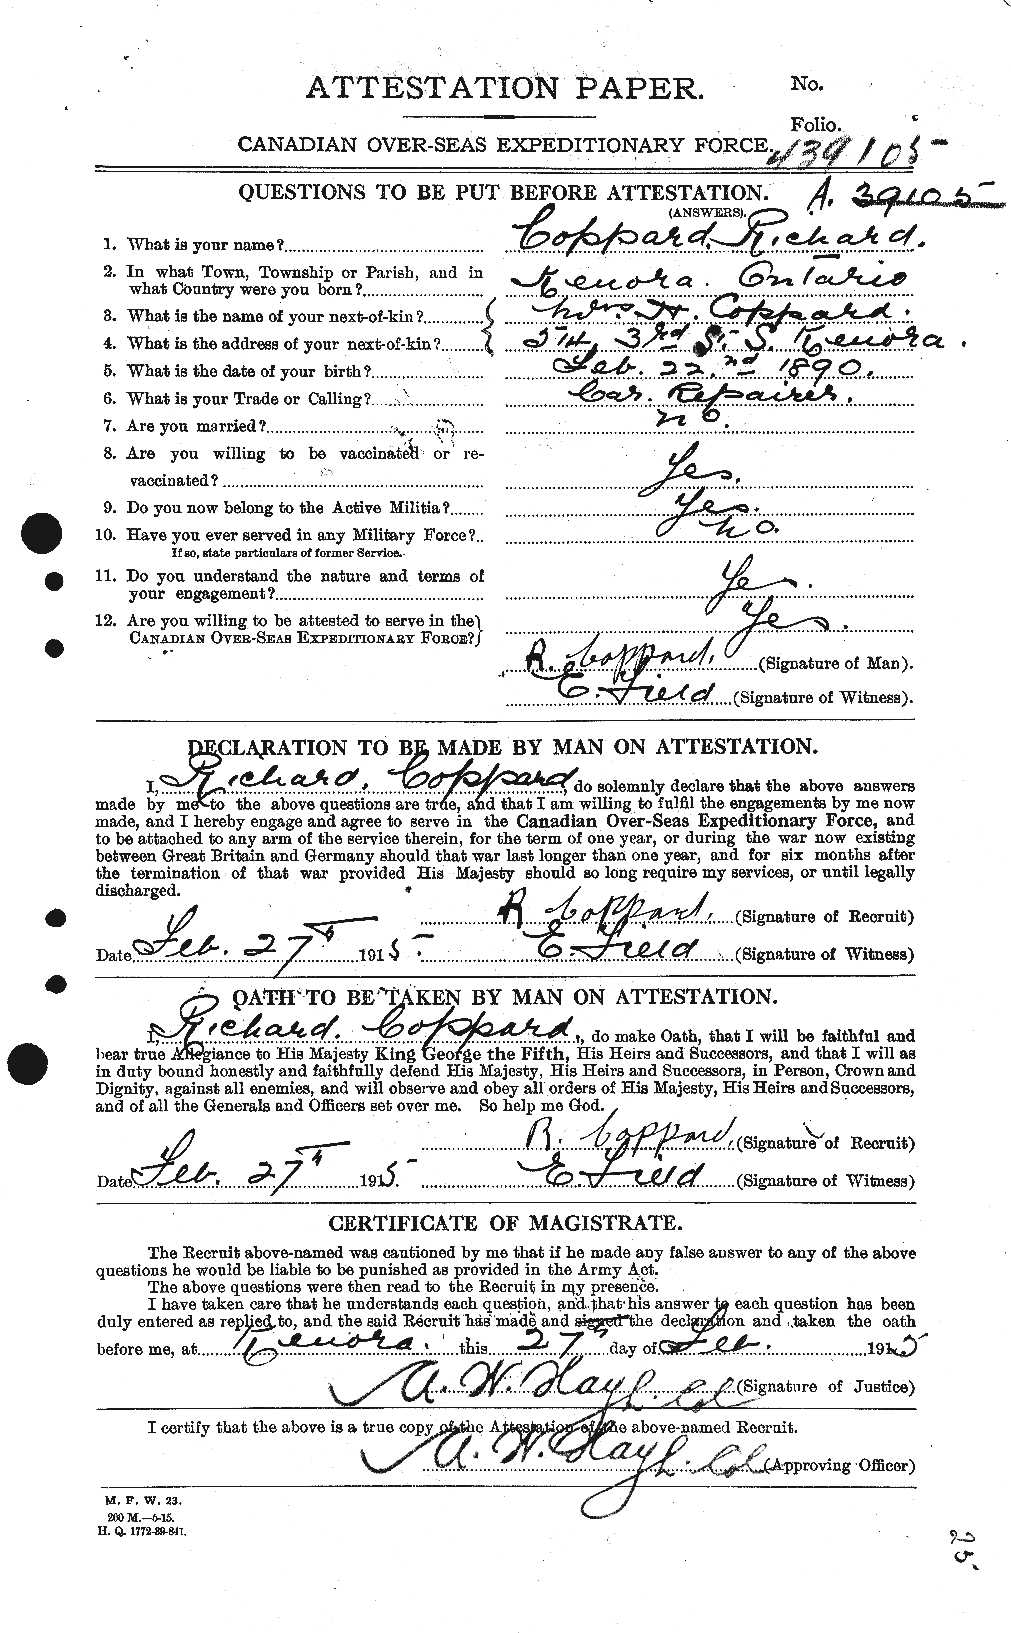 Personnel Records of the First World War - CEF 056221a